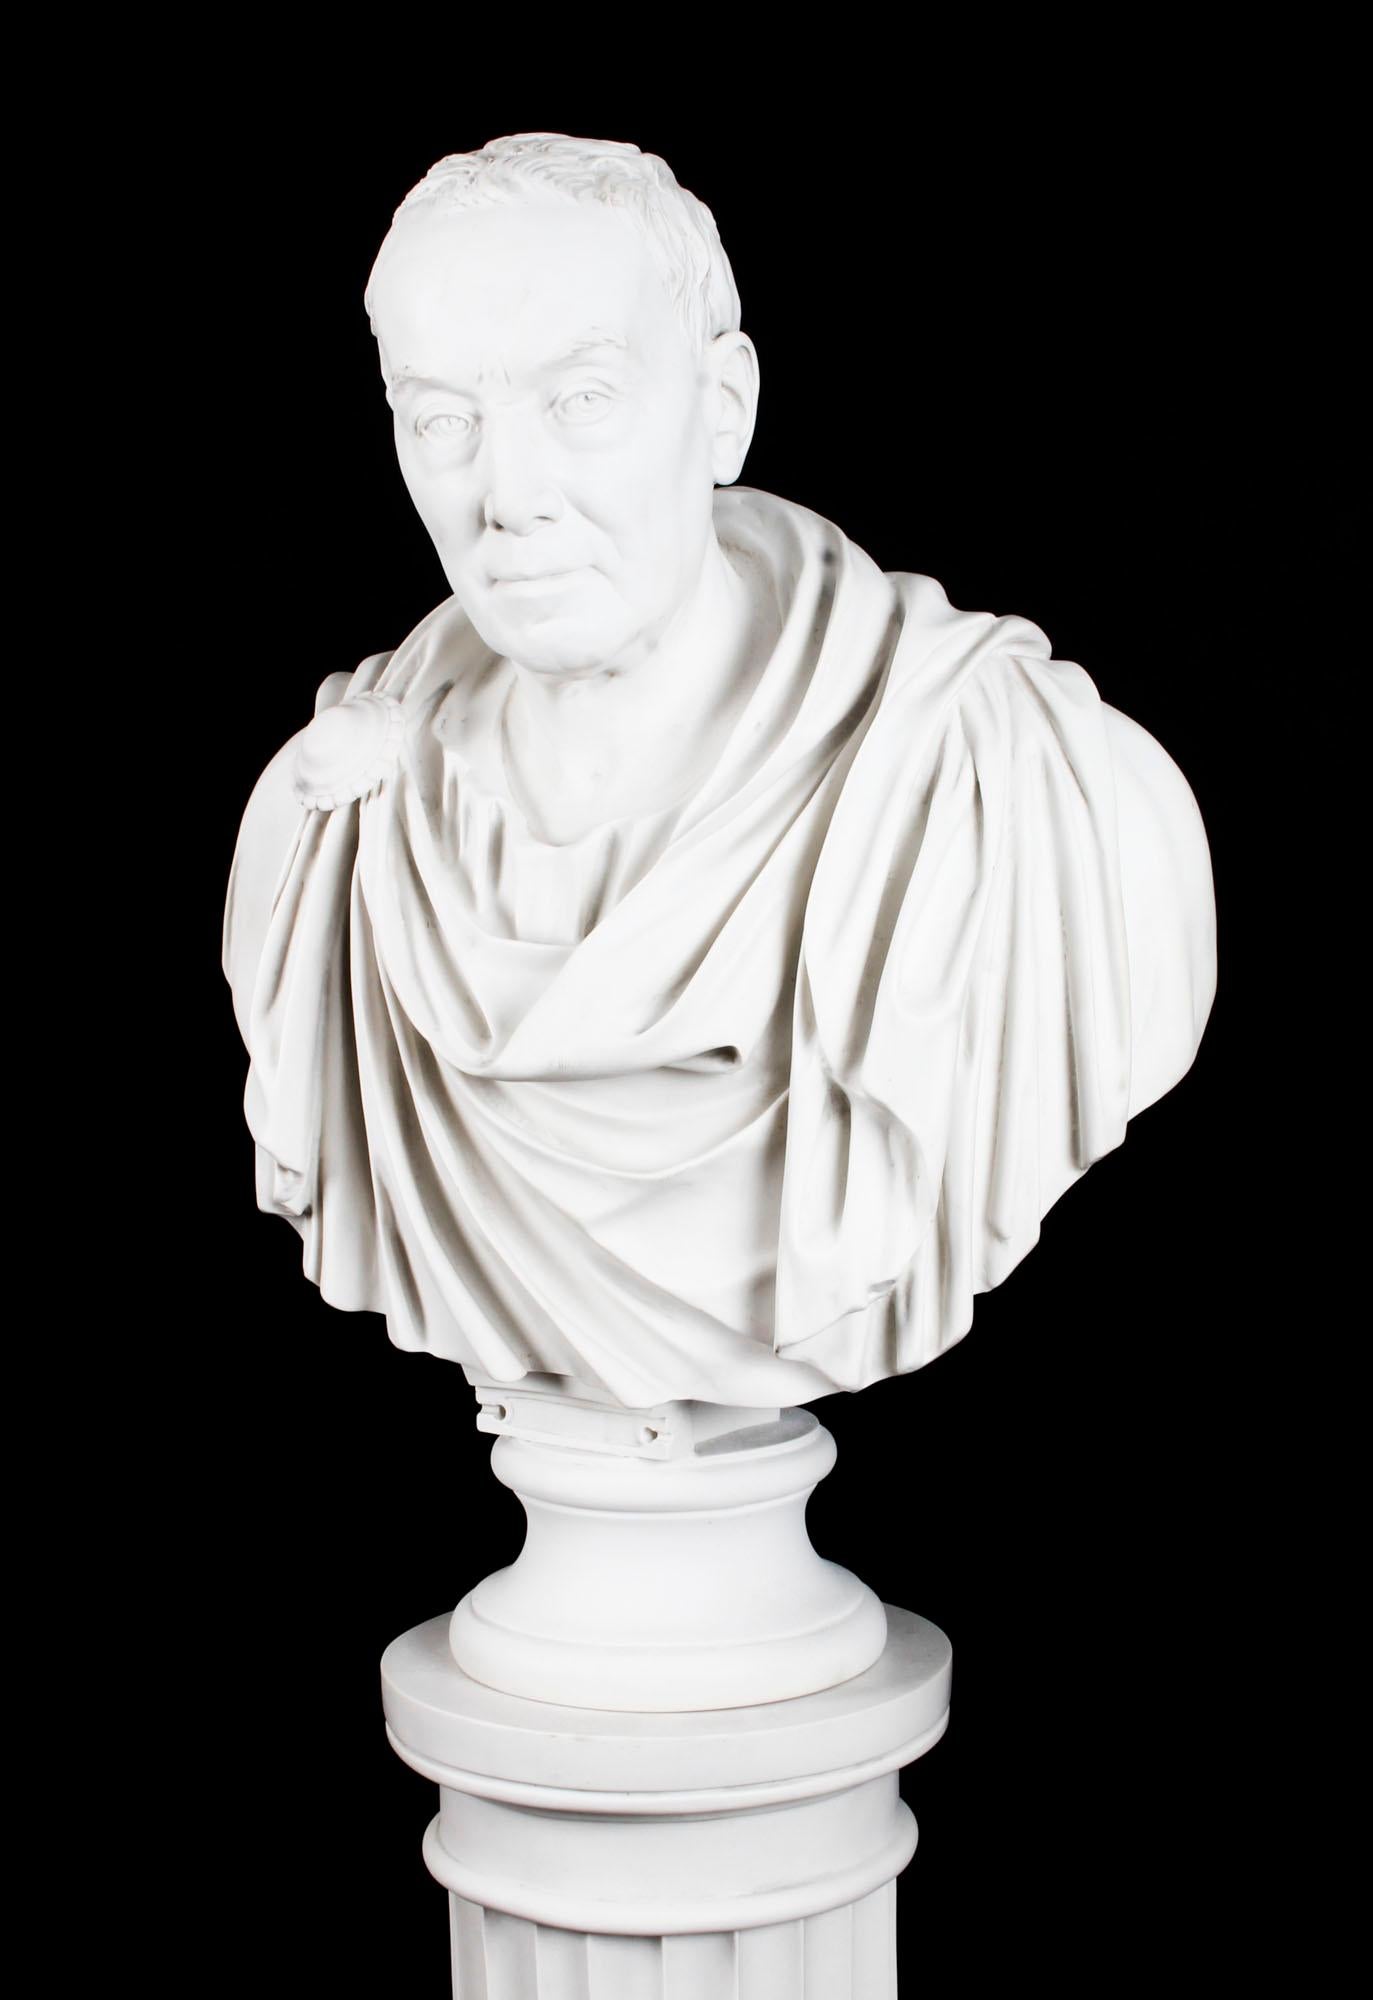 A beautifully sculpted composite marble bust of the famous Roman Statesman Julius Caesar, dating from the late 20th century.

The attention to detail throughout the piece is second to none and the figure is extremely lifelike.

This high quality